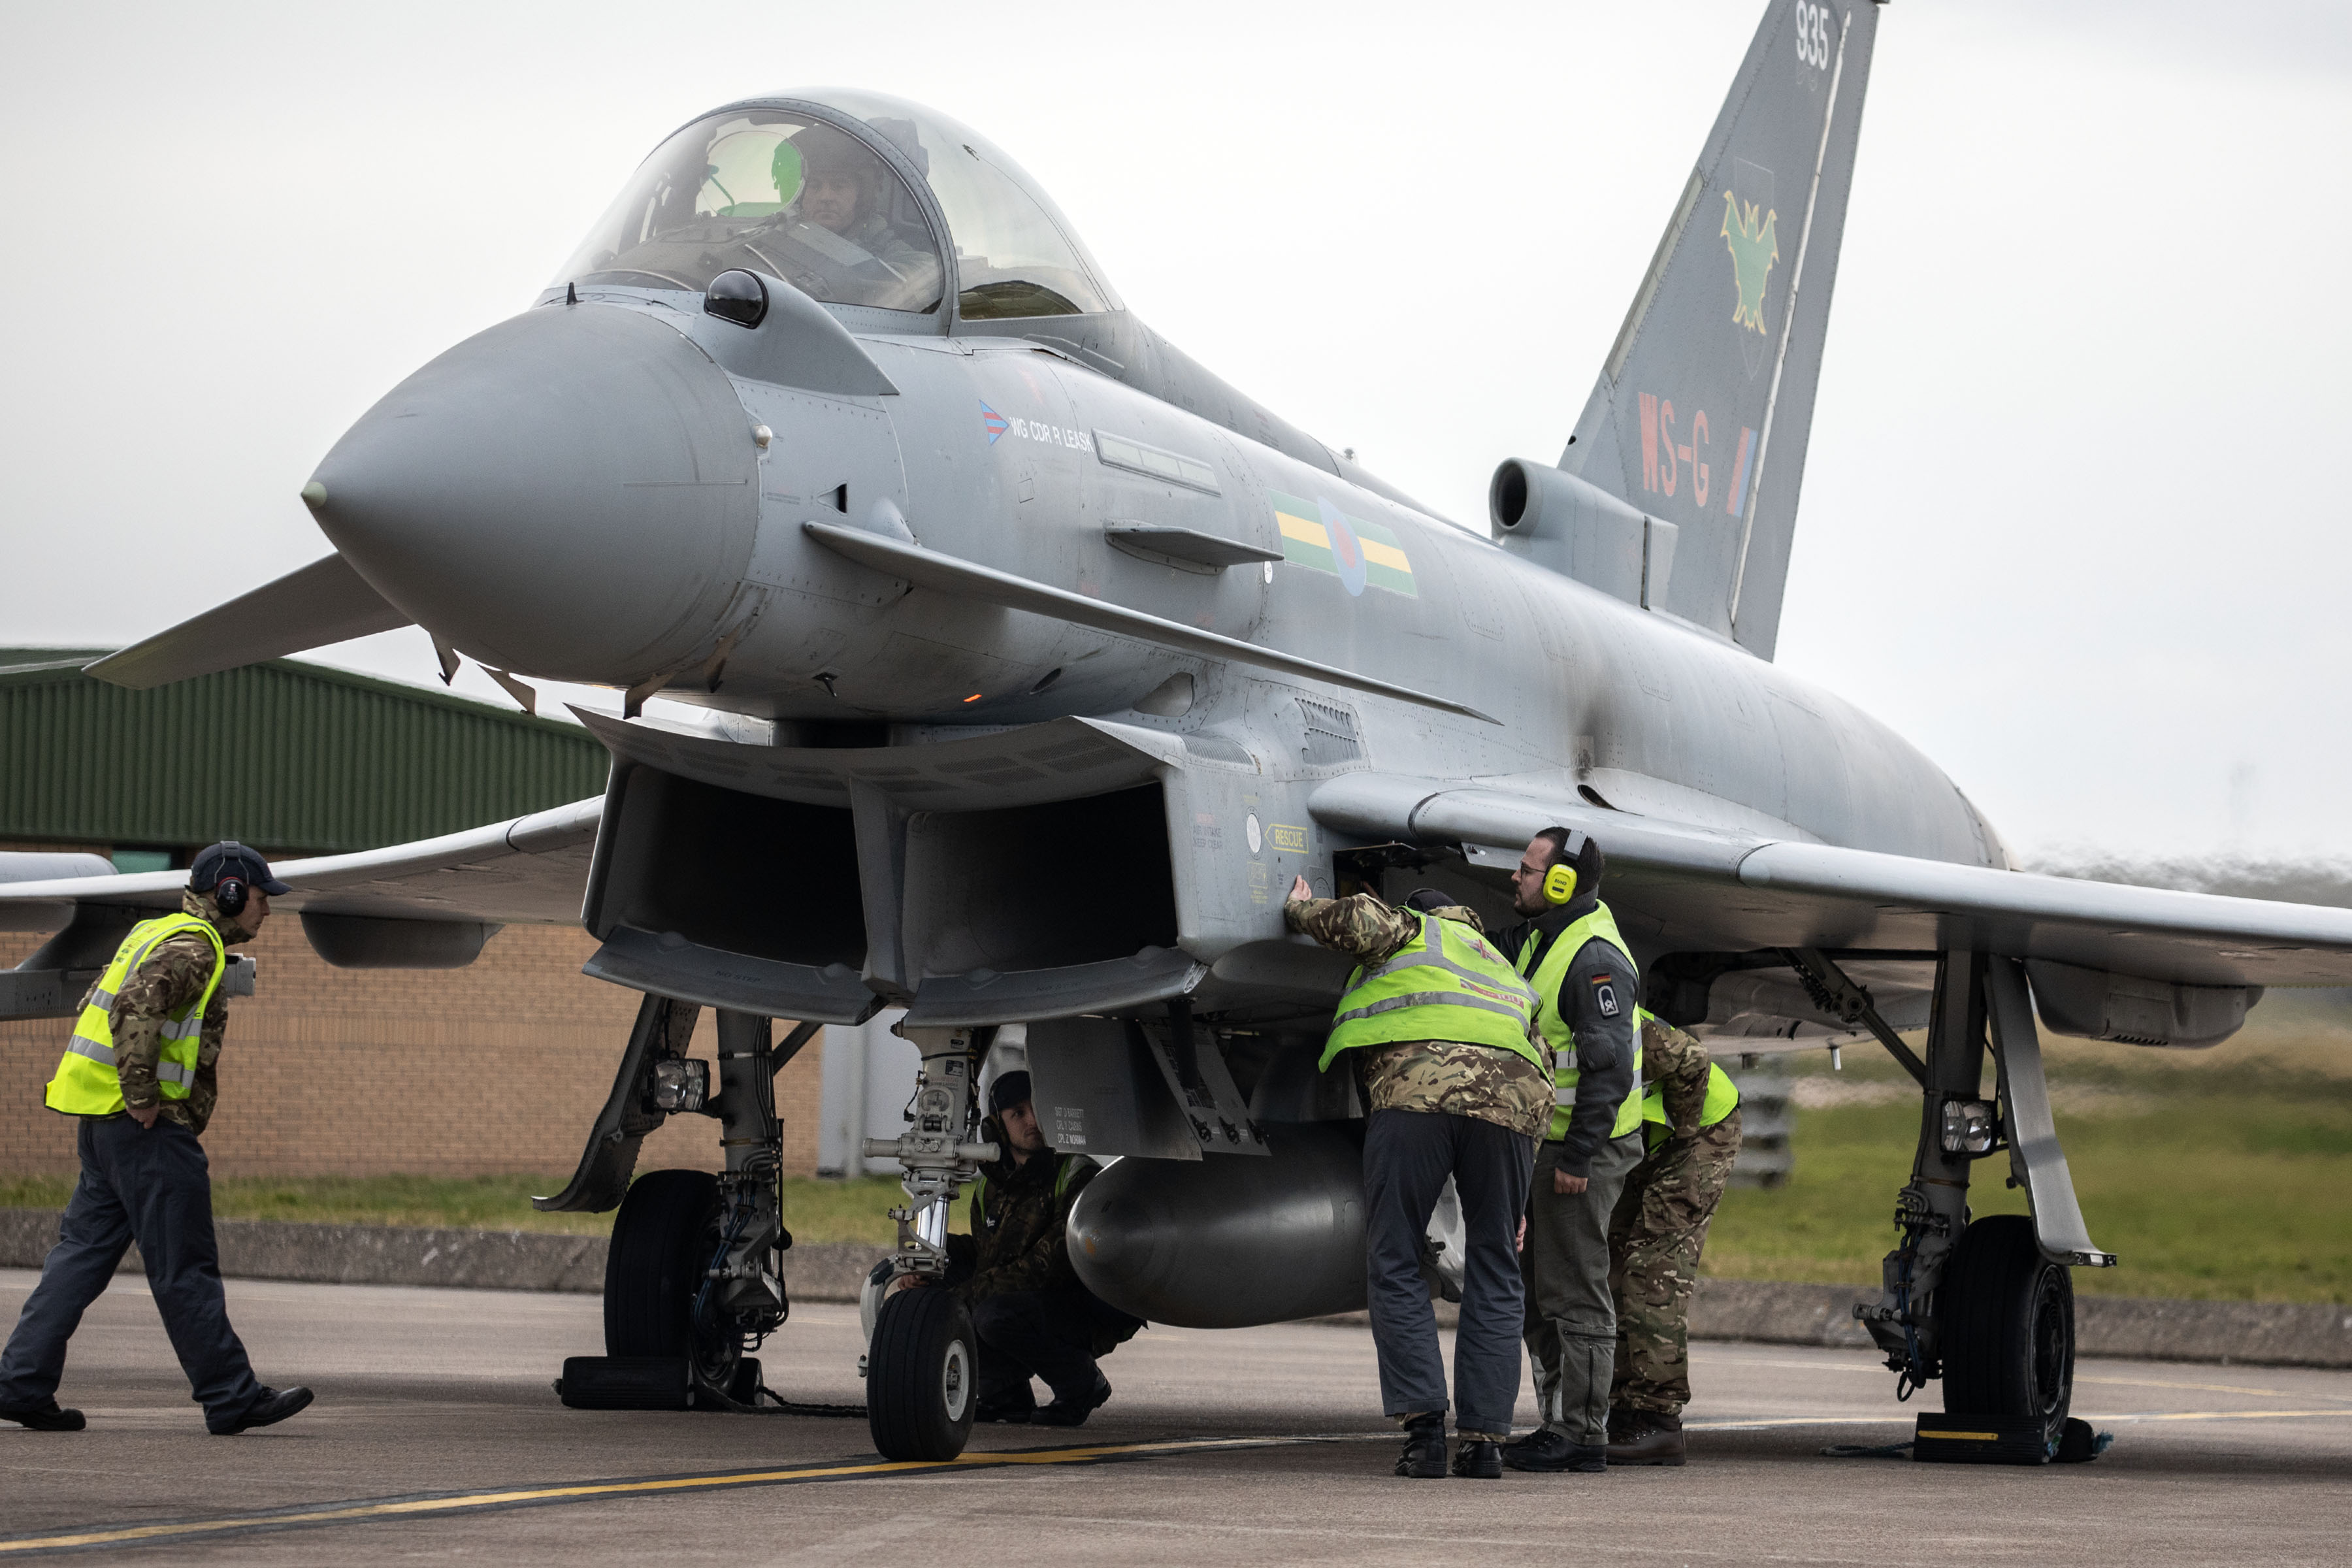 Image shows RAF aviators inspecting a Typhoon on the airfield.